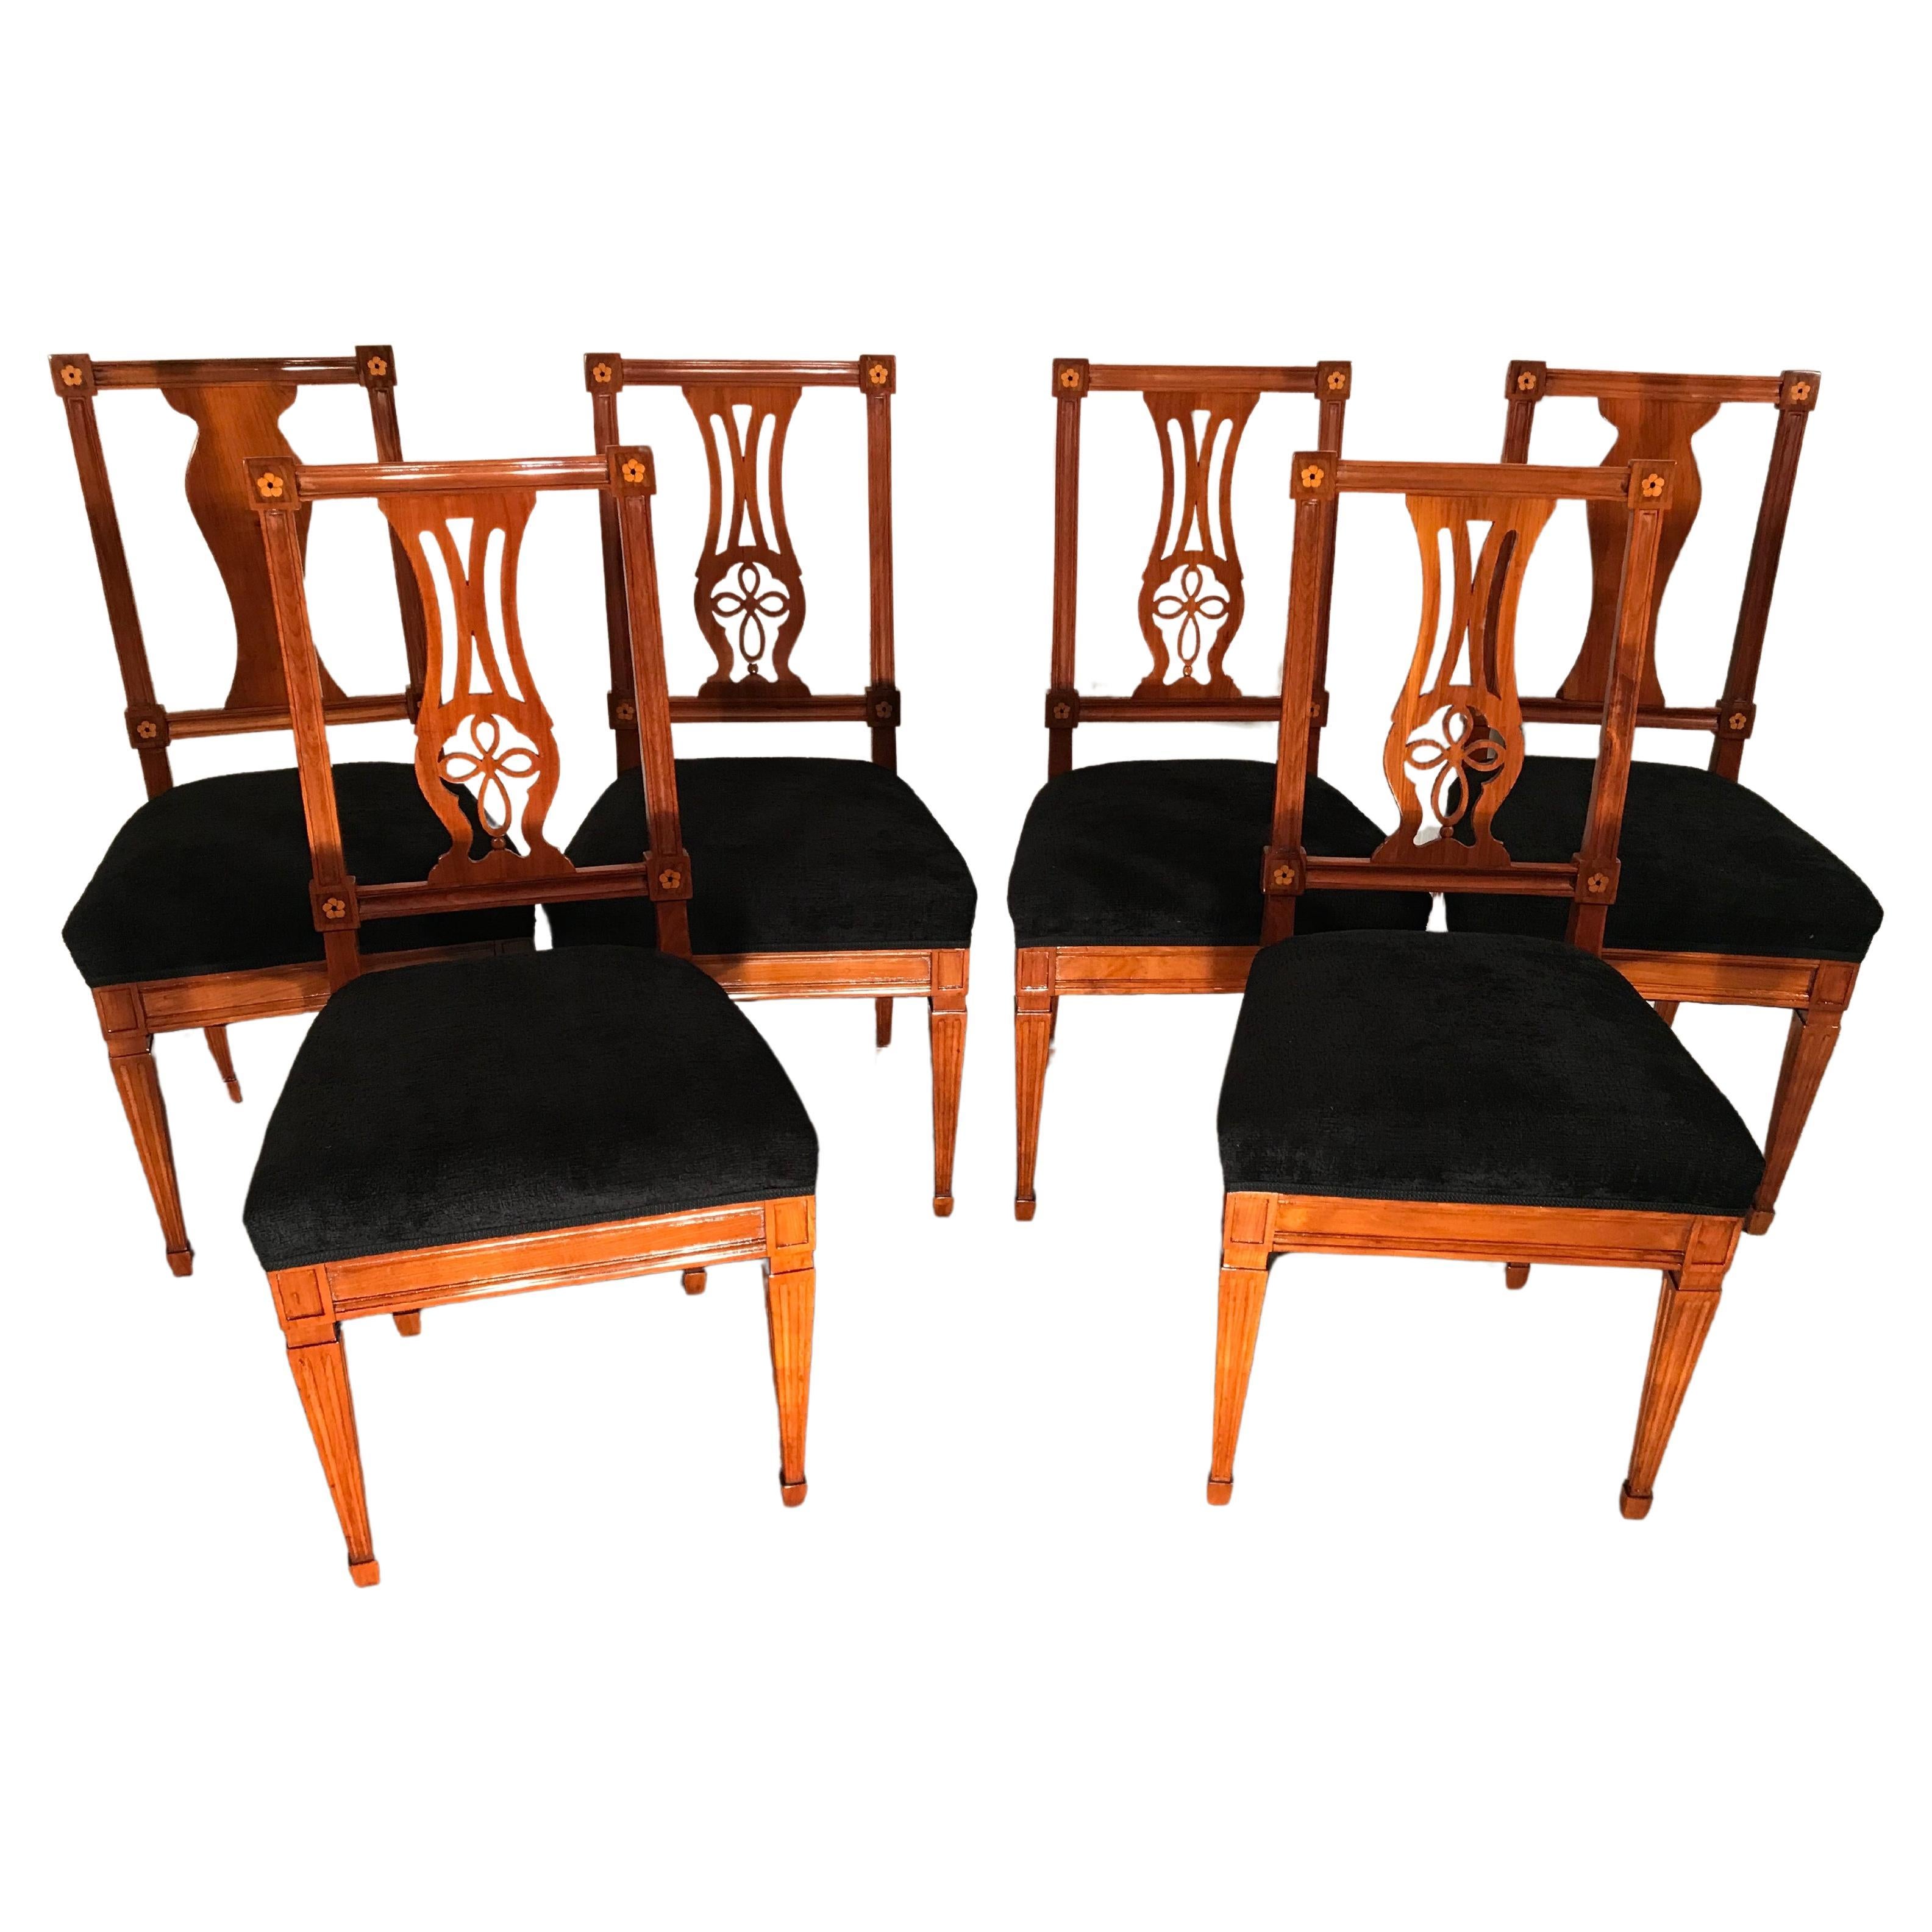 Set of 6 Neoclassical Chairs, Germany 1800 For Sale